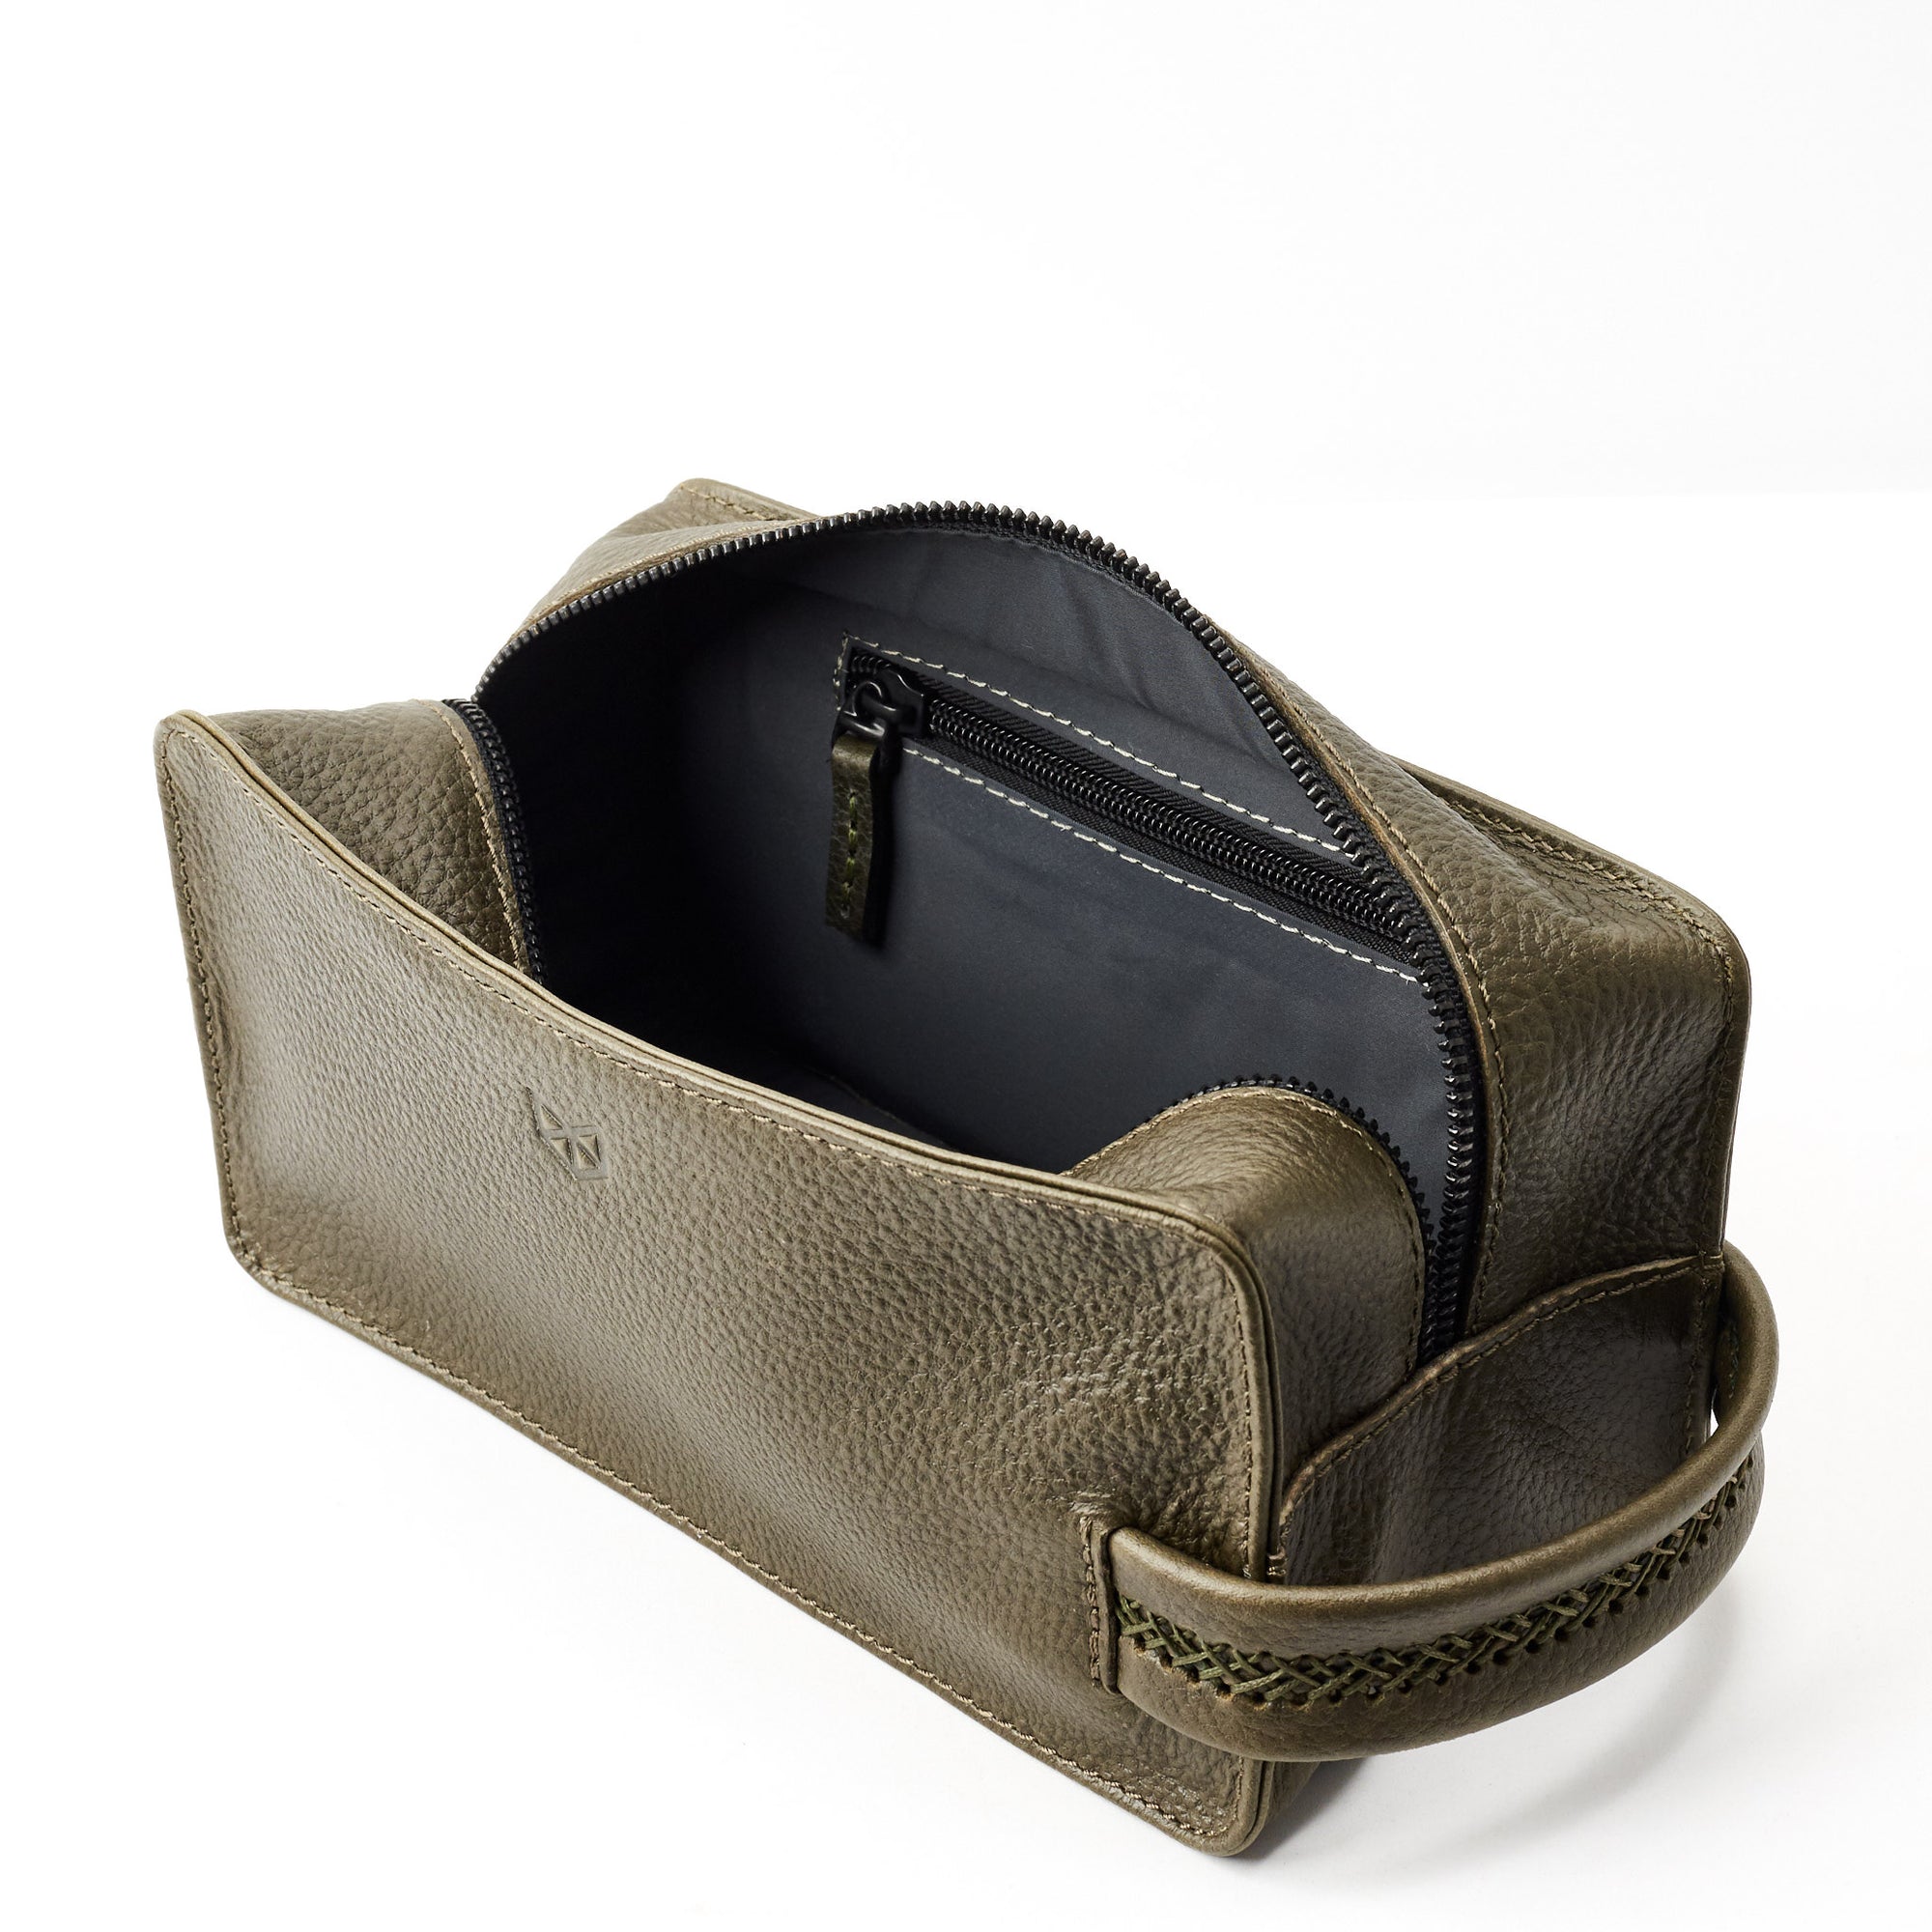 Interior pocket. Green leather toiletry, shaving bag with hand stitched handle. Groomsmen gifts